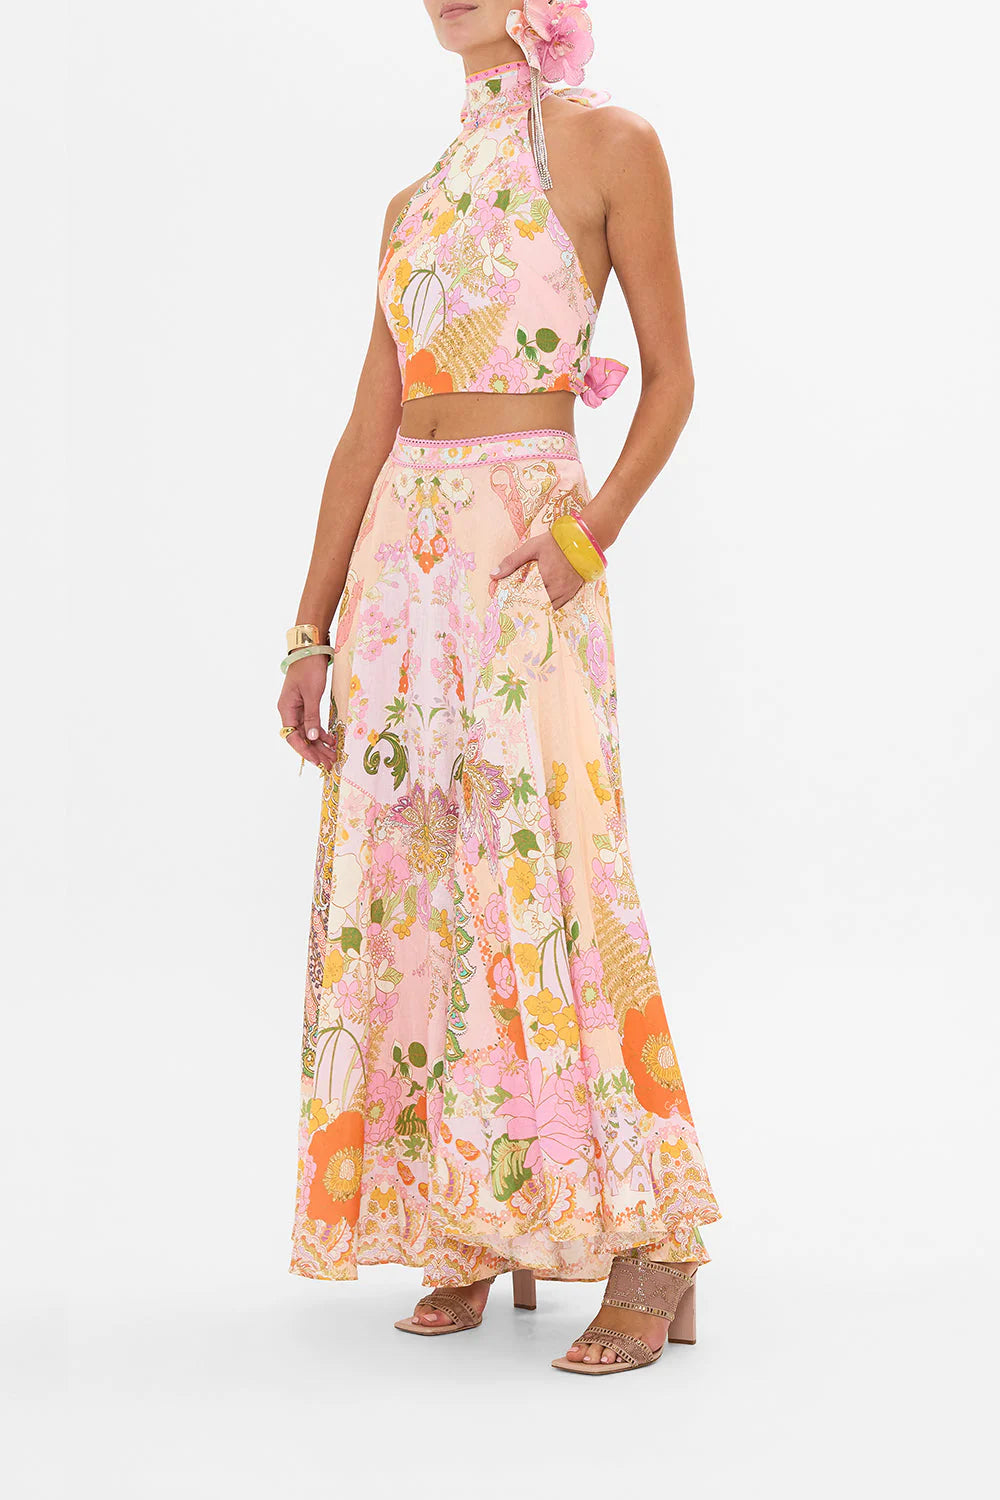 Camilla Maxi Circle Skirt in Clever Clogs